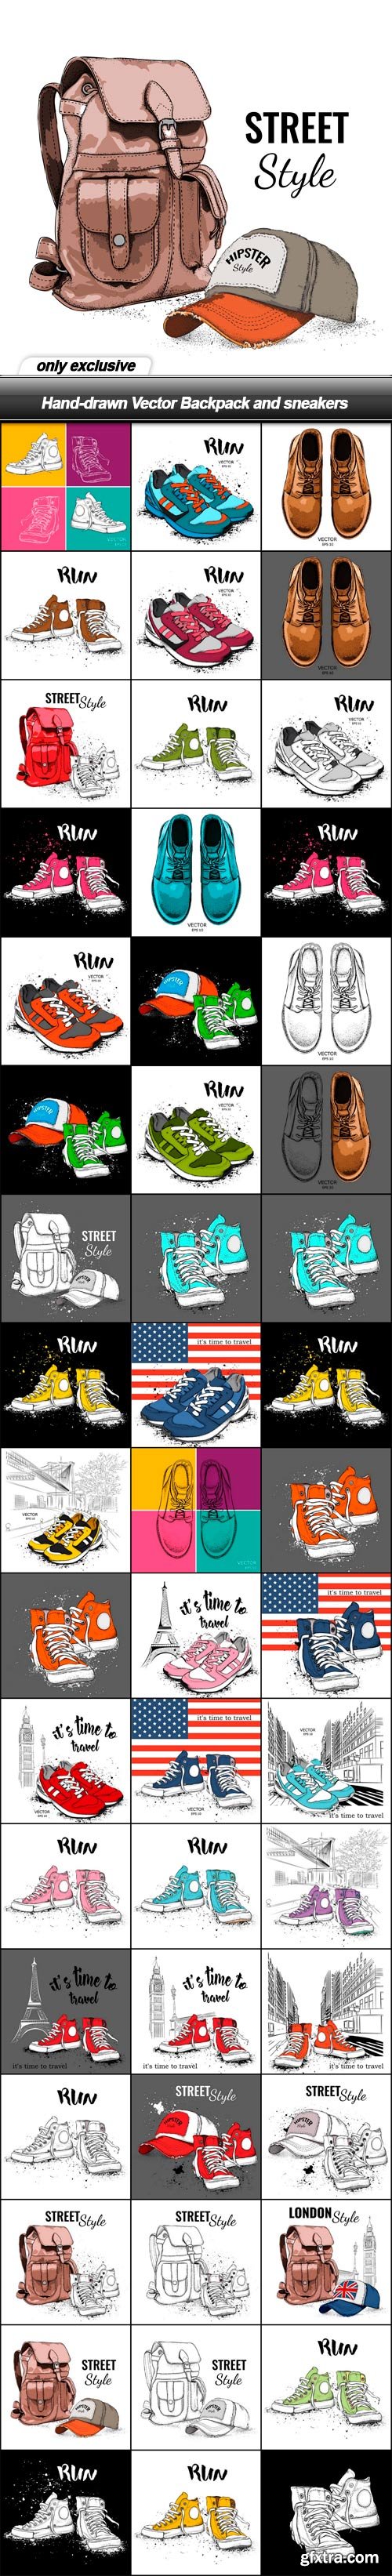 Hand-drawn Vector Backpack and sneakers - 51 EPS